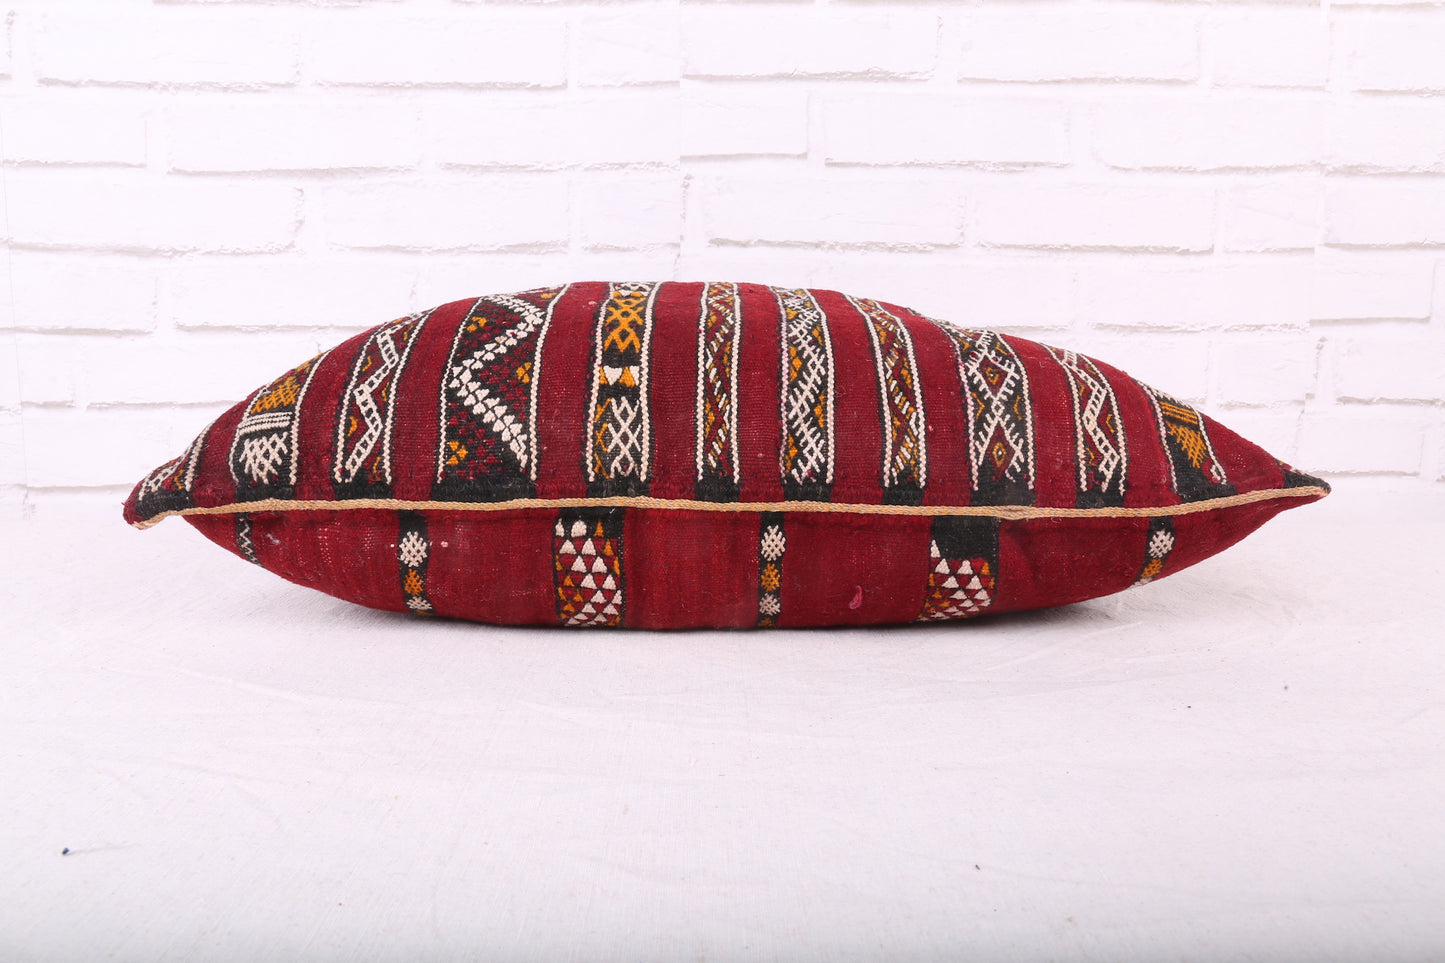 Moroccan Style Pillow 16.9 inches X 21.2 inches